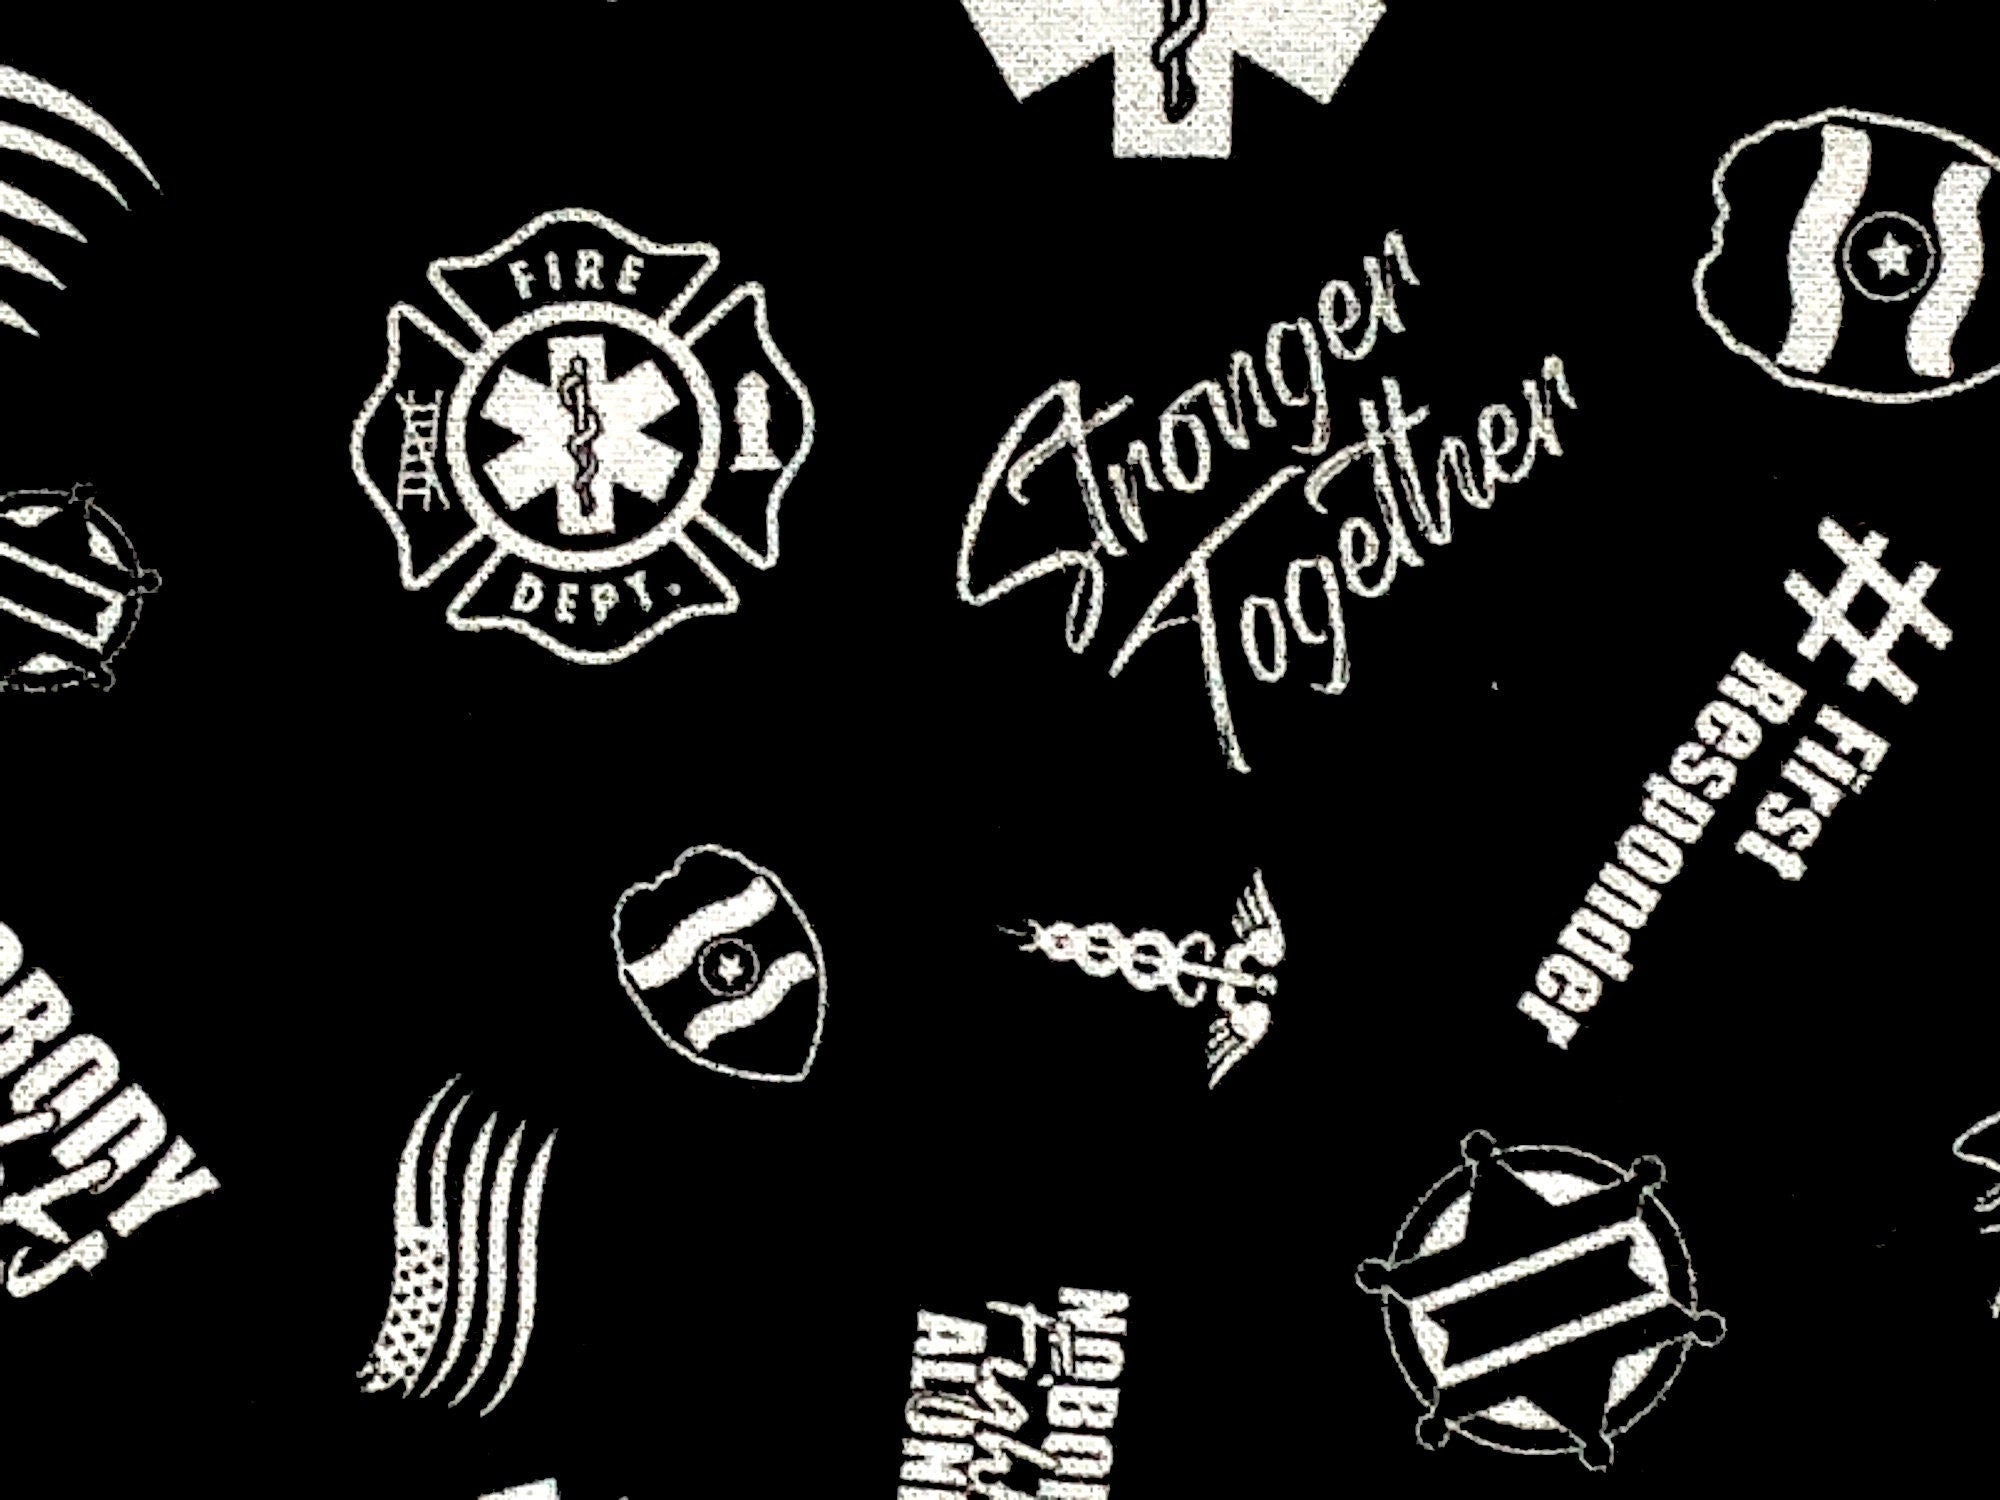 Close up of stronger together and other symbols.